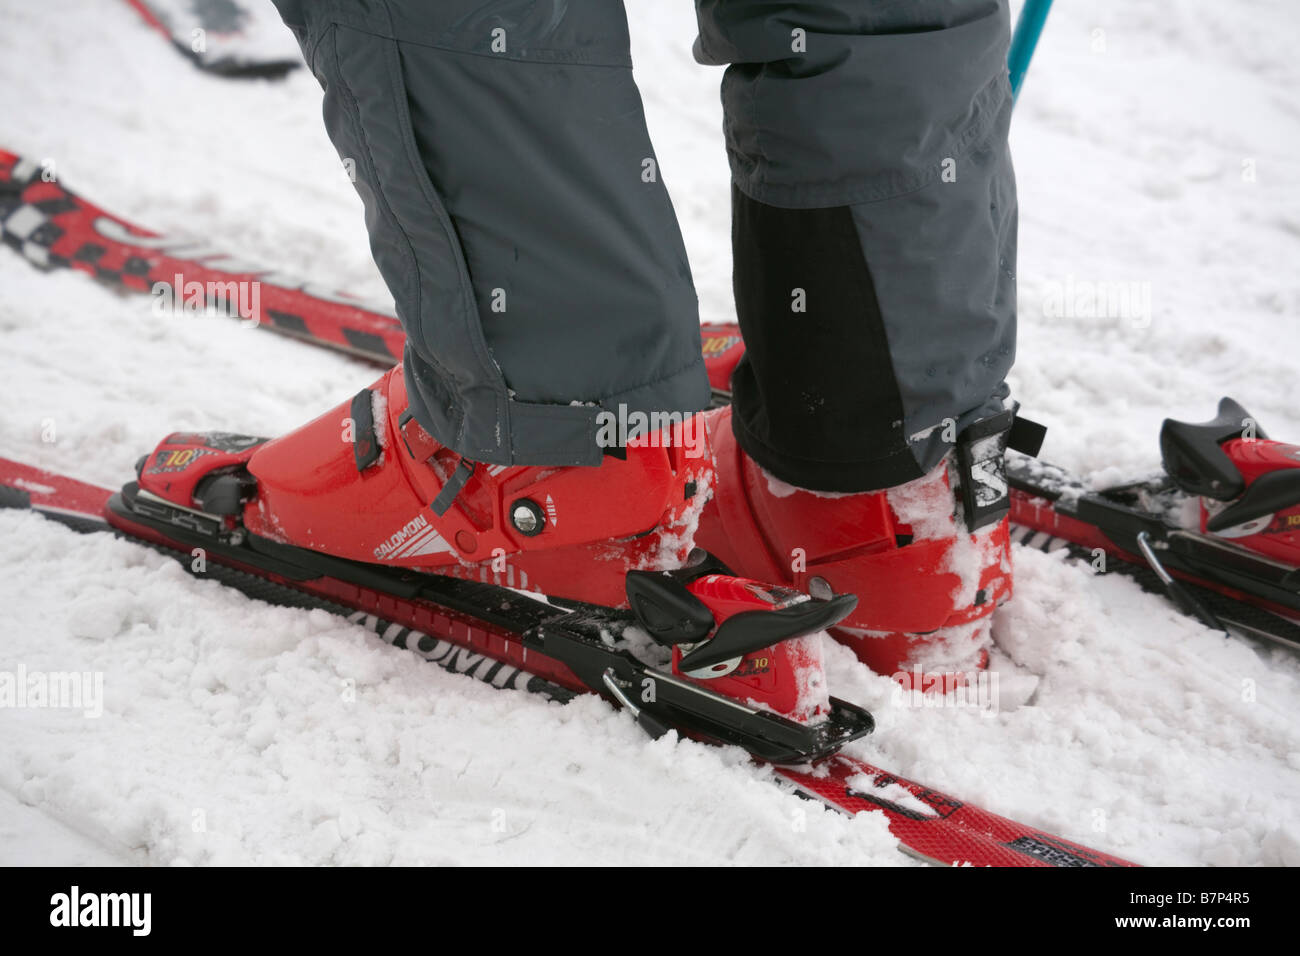 Close up of man wearing a pair of red Salomon ski boots and bindings on a pair of skis. Europe Stock Photo